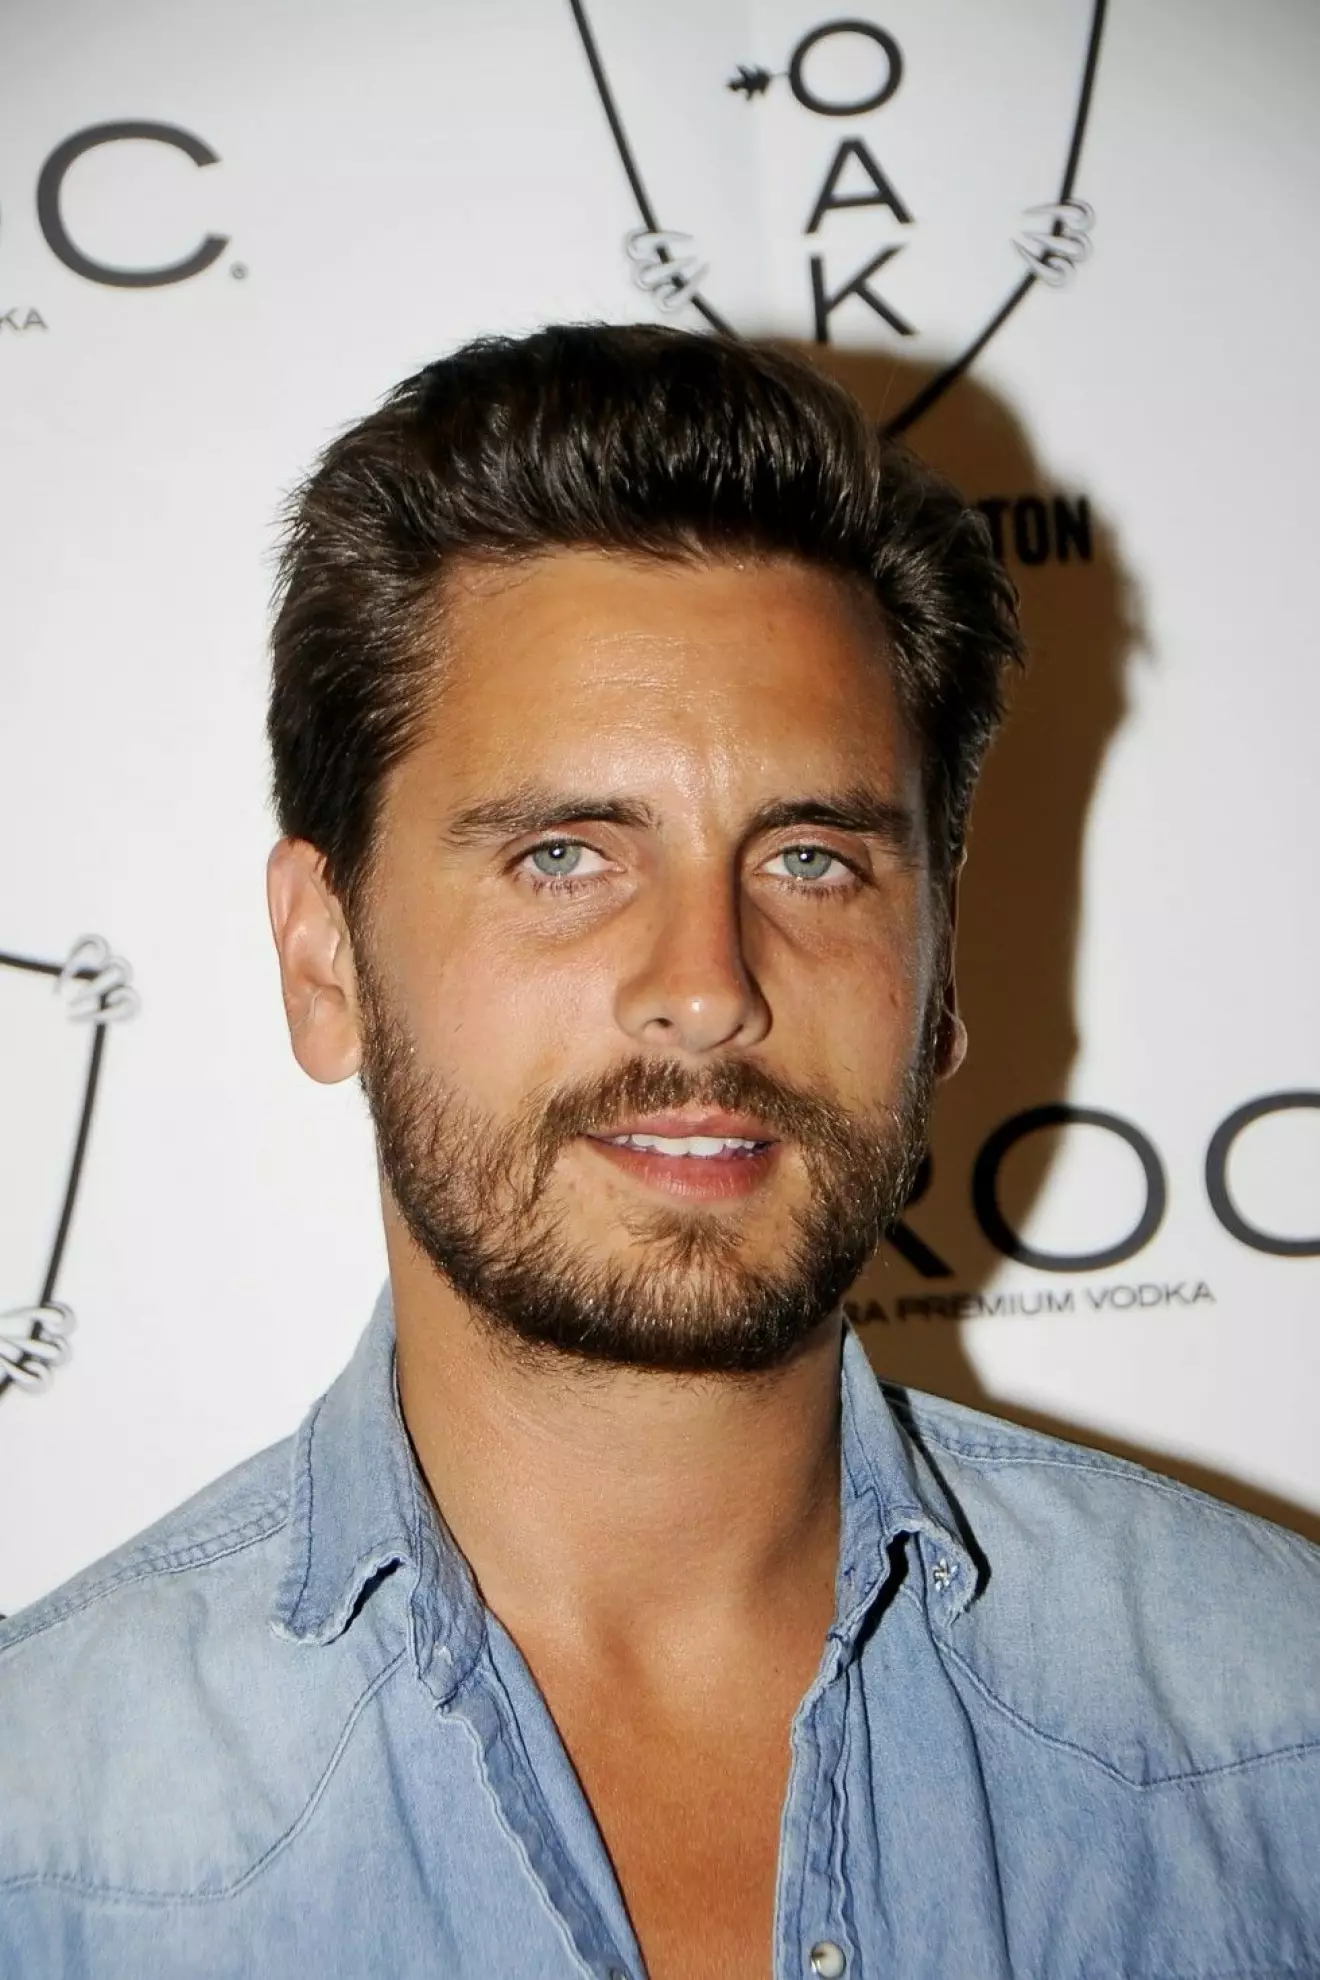 Scott Disick is seen spraying a champagne bottle as he parties at a nightclub in The Hamptons on the night he reportedly ended up in the hospital for Alcohol Poisoning